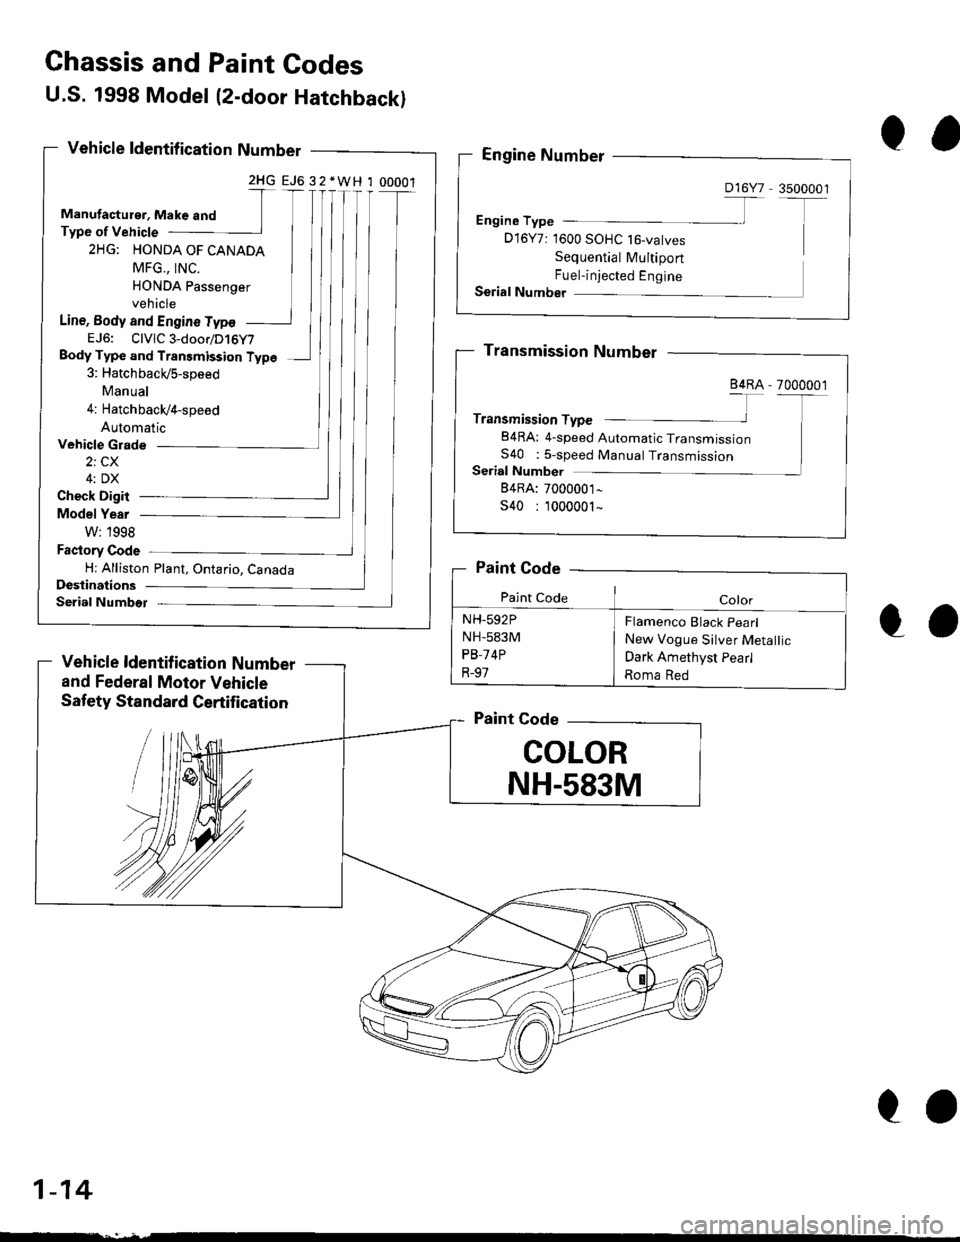 HONDA CIVIC 2000 6.G User Guide Ghassis and Paint Godes
Vehicle Grade
2i CX
4: DX
Check Digit
Model Year
W: 1998
Factory Code
Hr Alliston Plant, Ontario, CanadaDeslinations
Serial Numbet
Vehicle ldentif ication Number
and Federal Mo